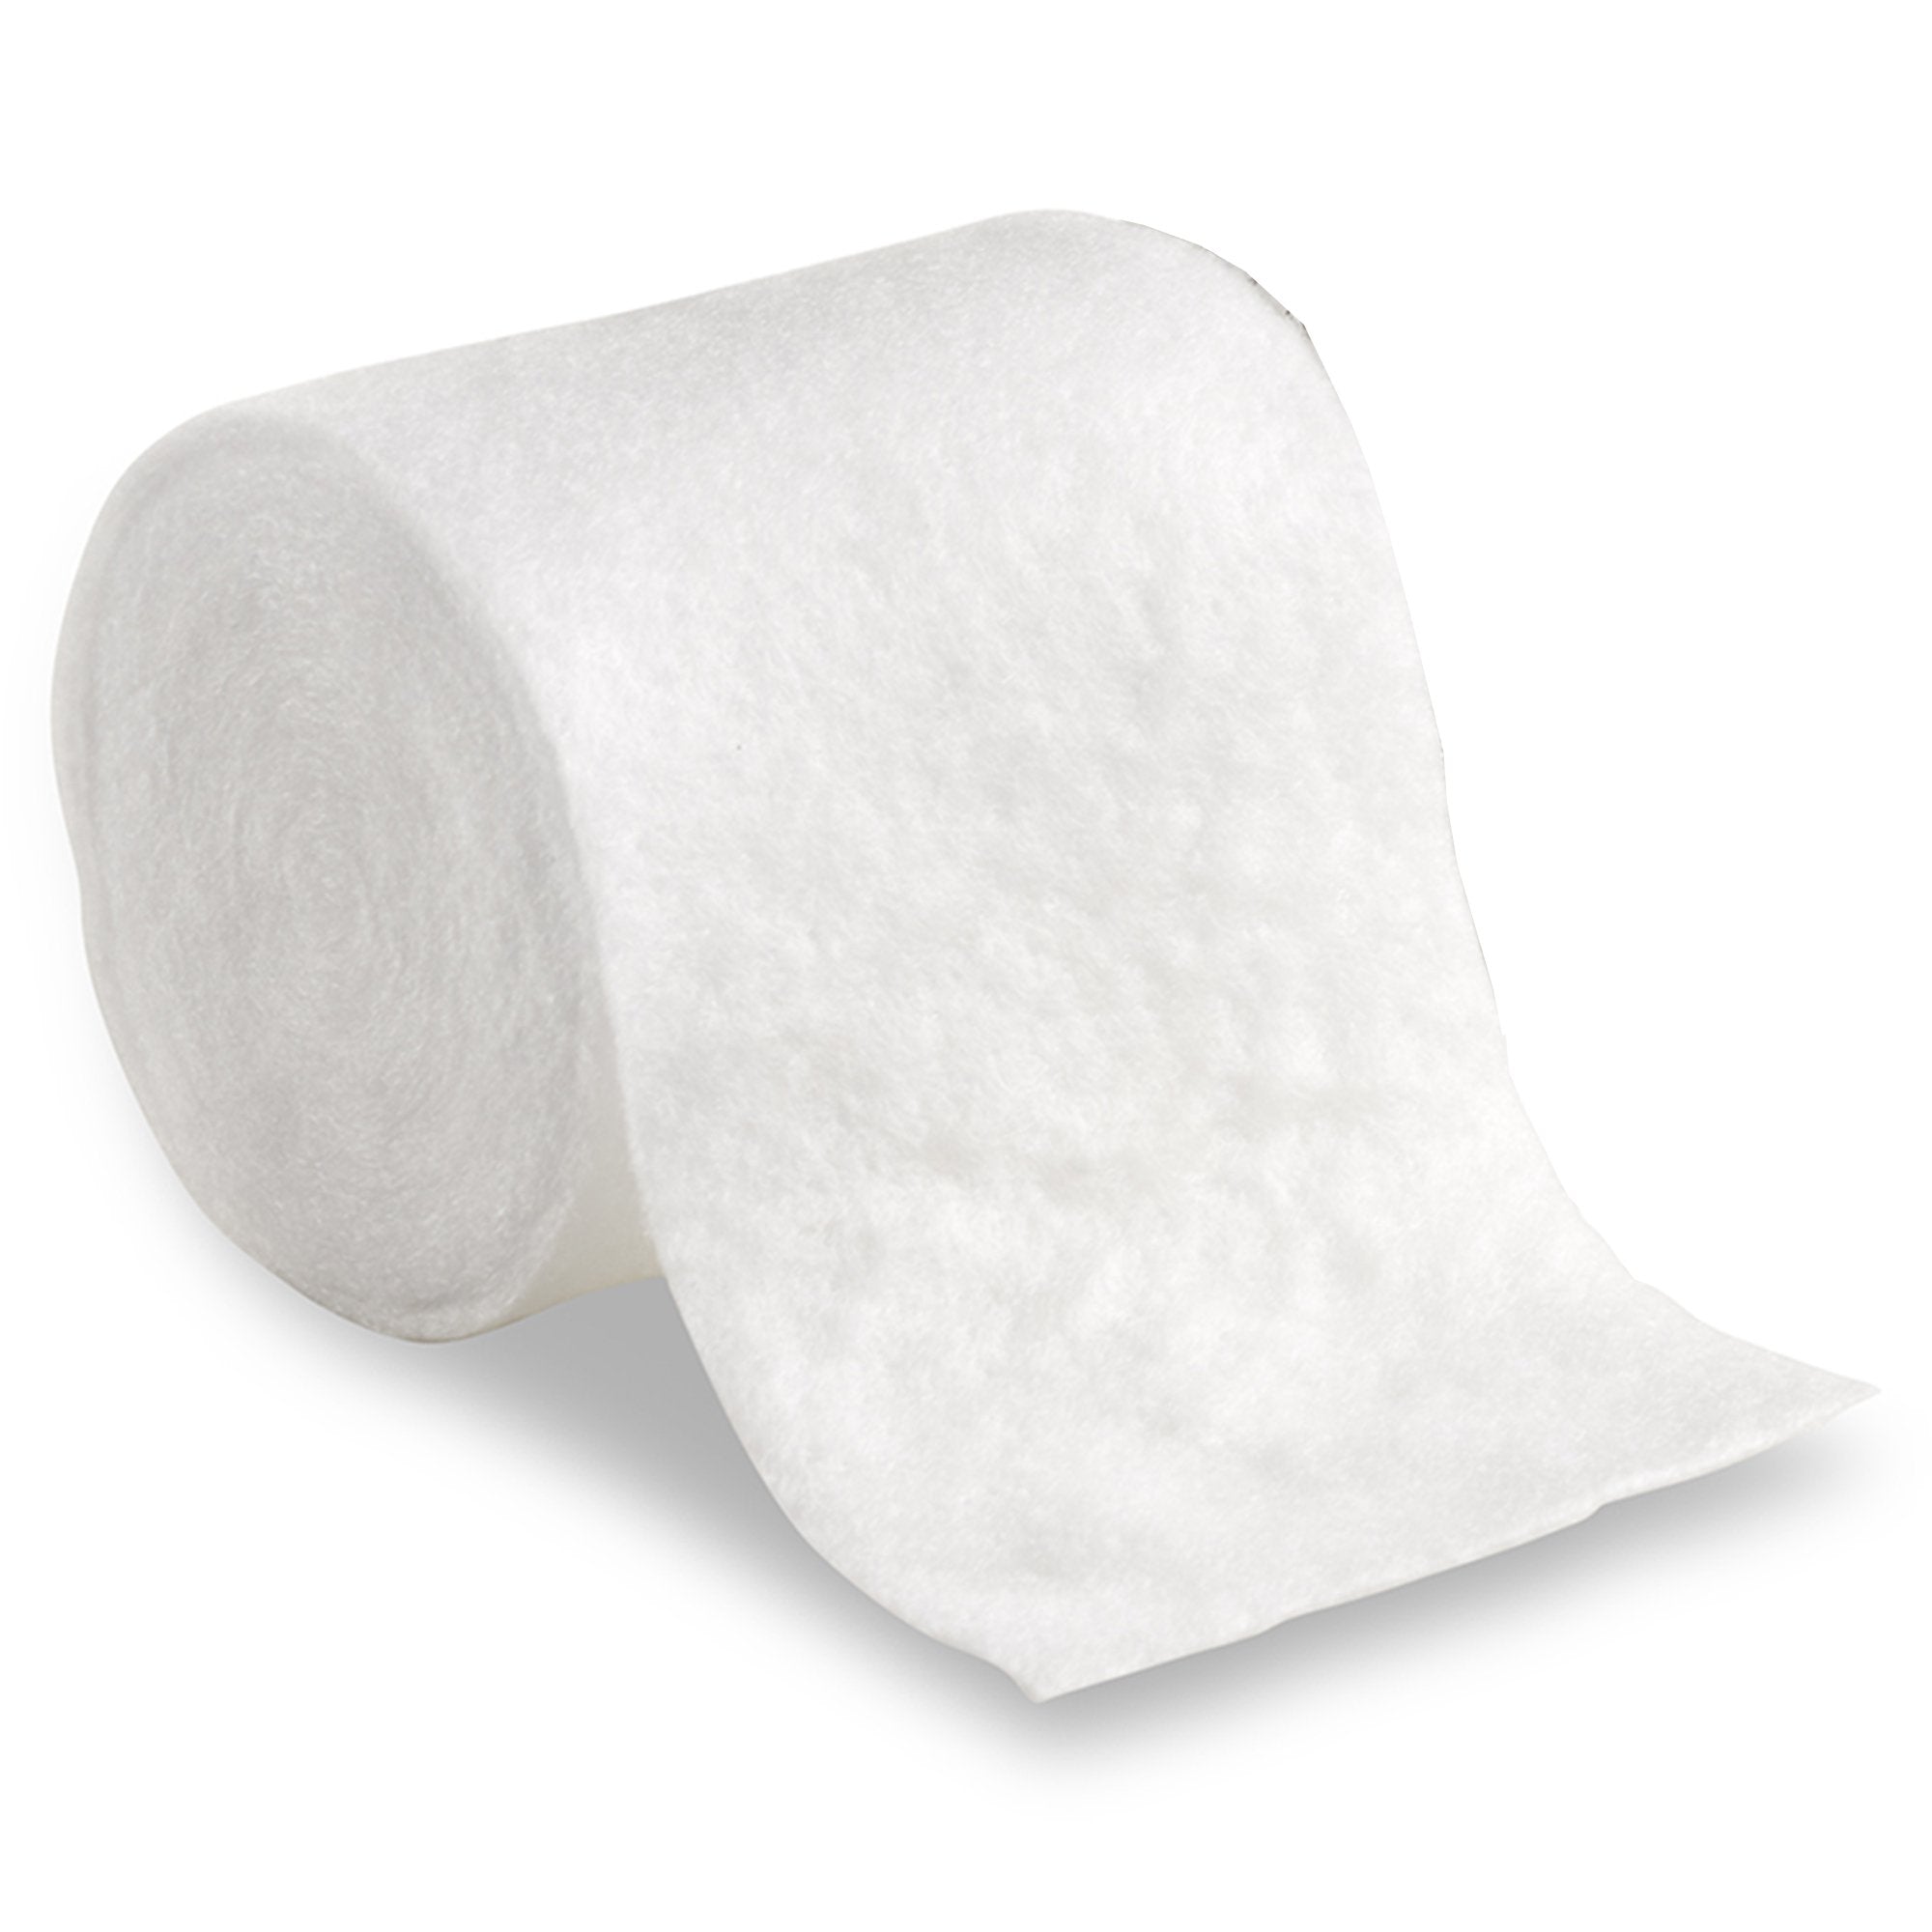 Cast Padding Water Resistant 3M™ Scotchcast™ Wet or Dry 3 Inch X 4 Yard Polypropylene / Polyethylene Knit / Nonwoven Fibers NonSterile